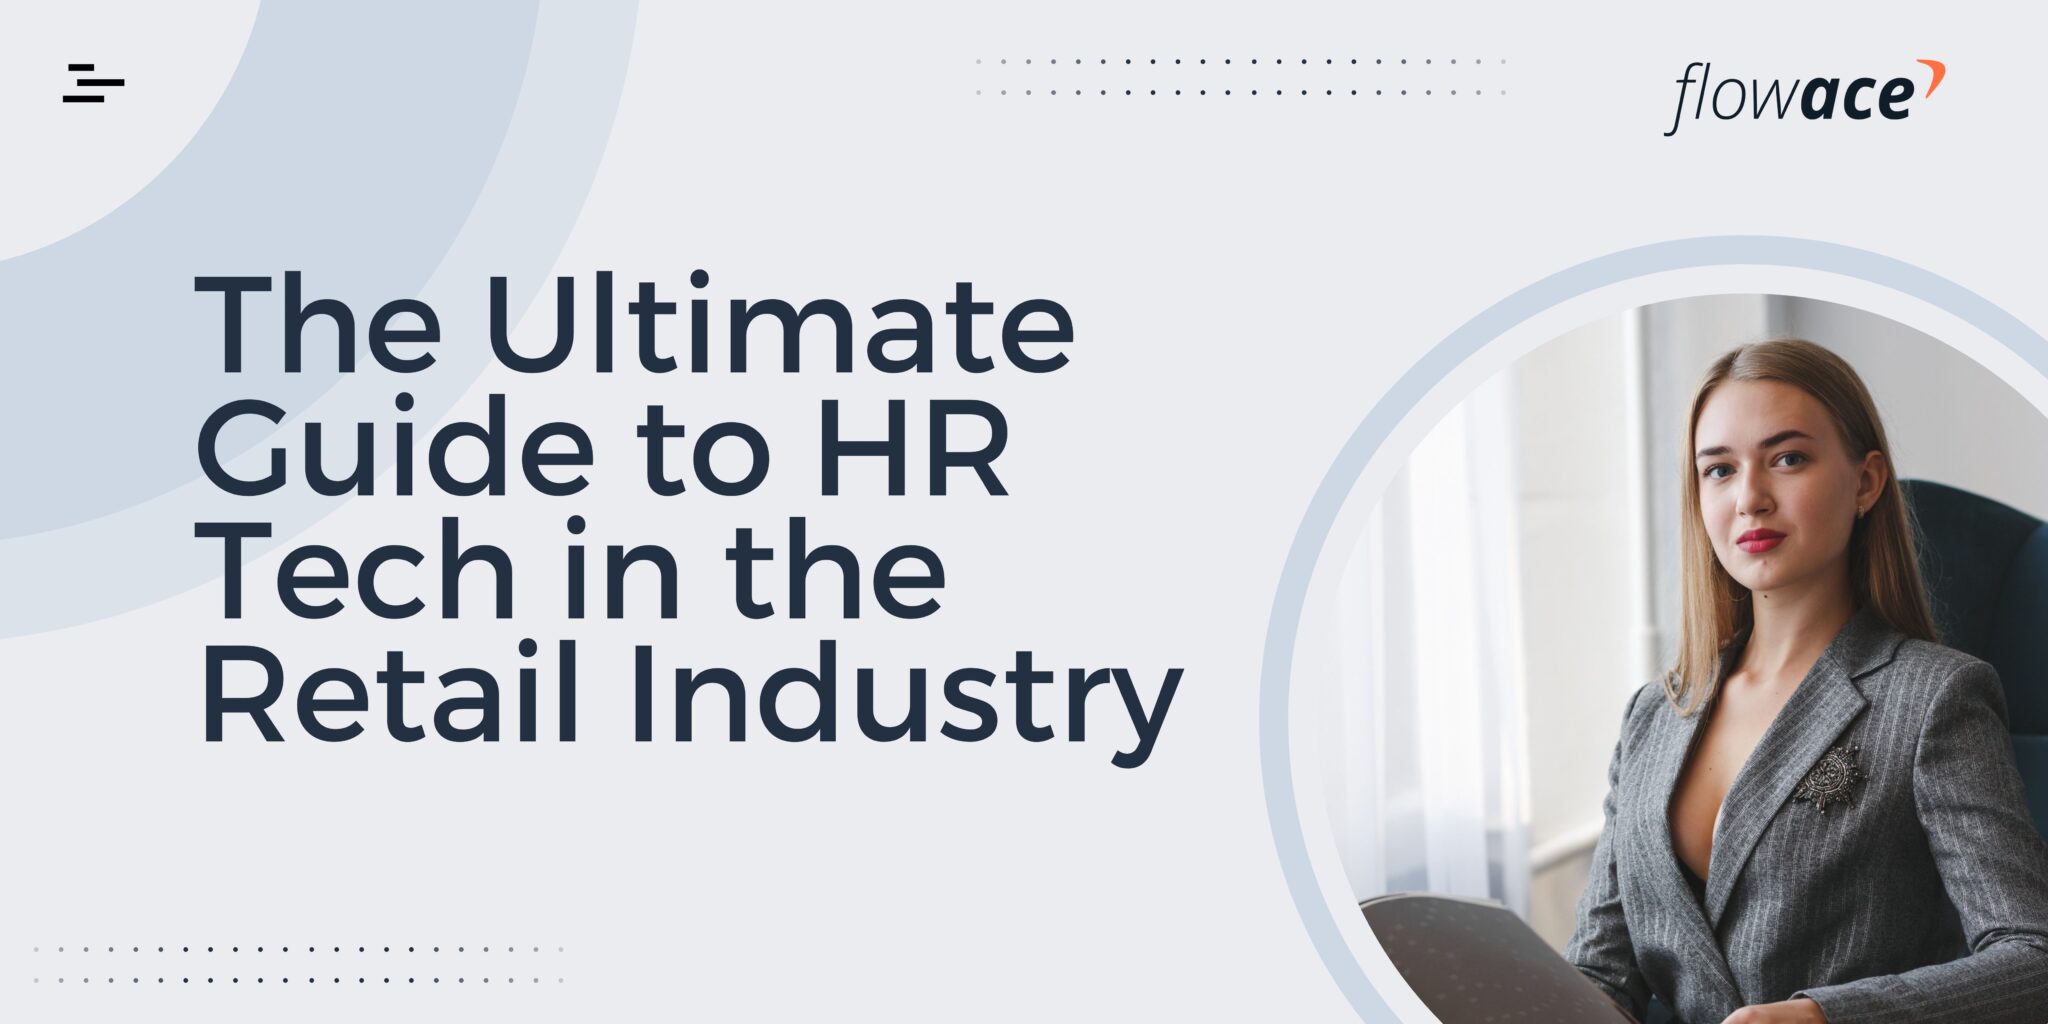 The Ultimate Guide to HR Tech in the Retail Industry